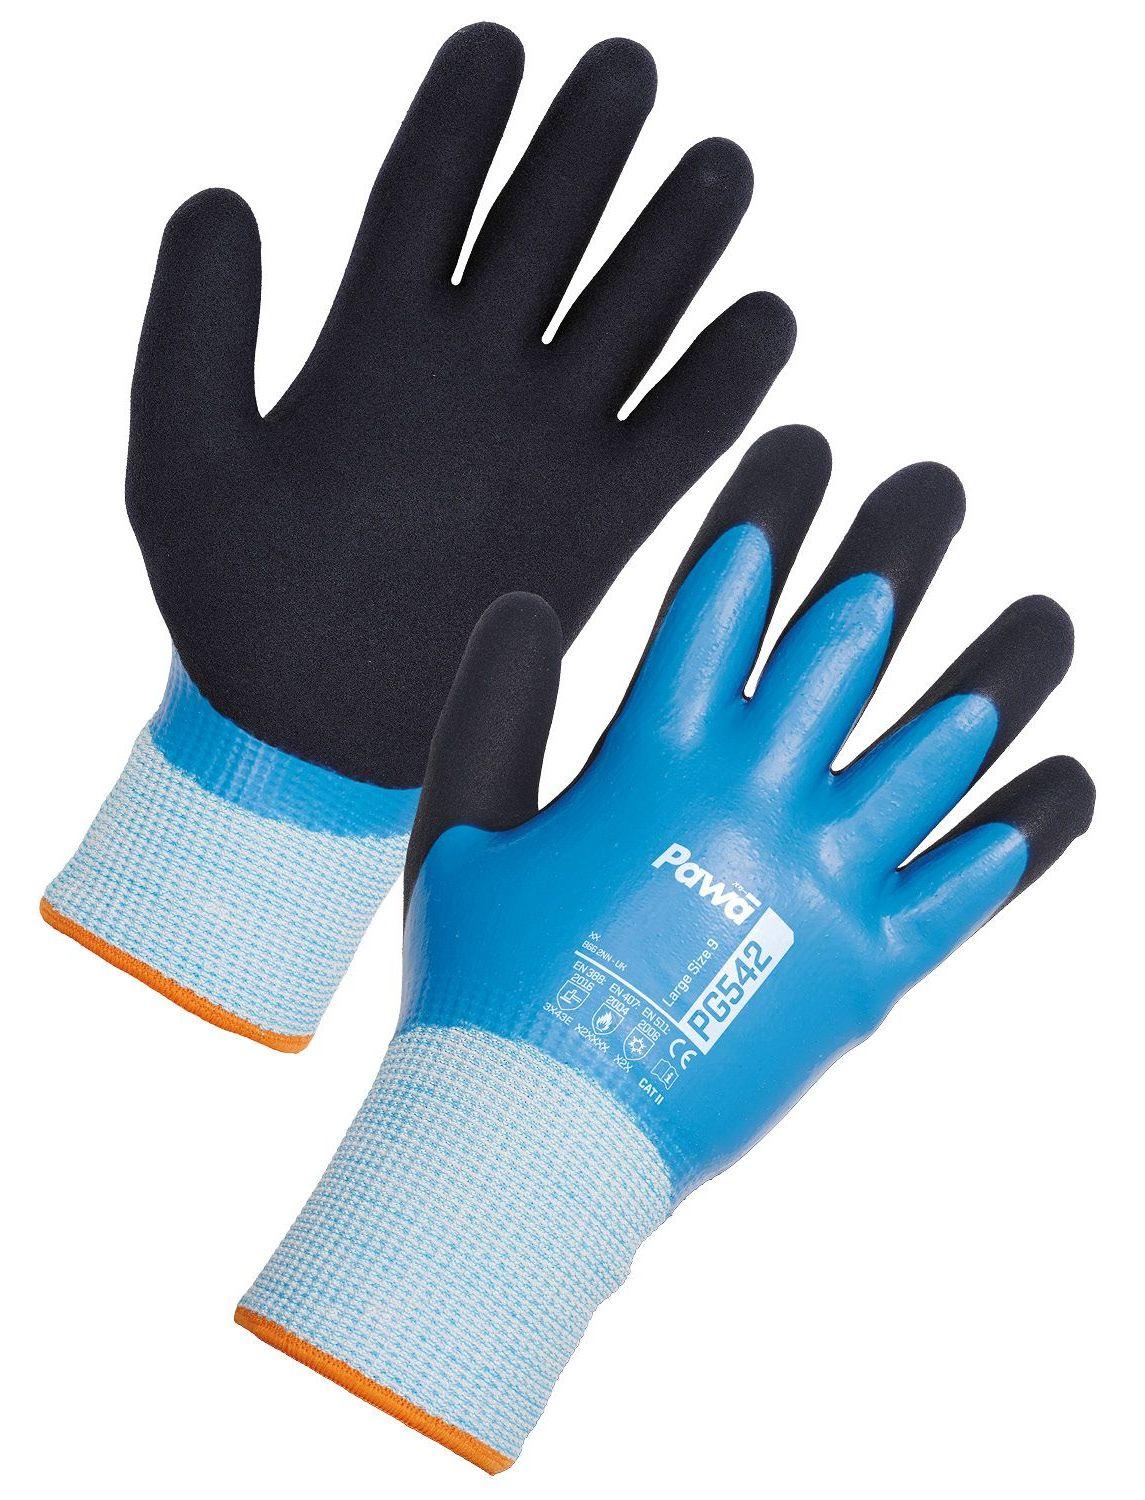 Pawa Gloves - Thanet Tool Supplies | Cut Level E | Water Resistant ...